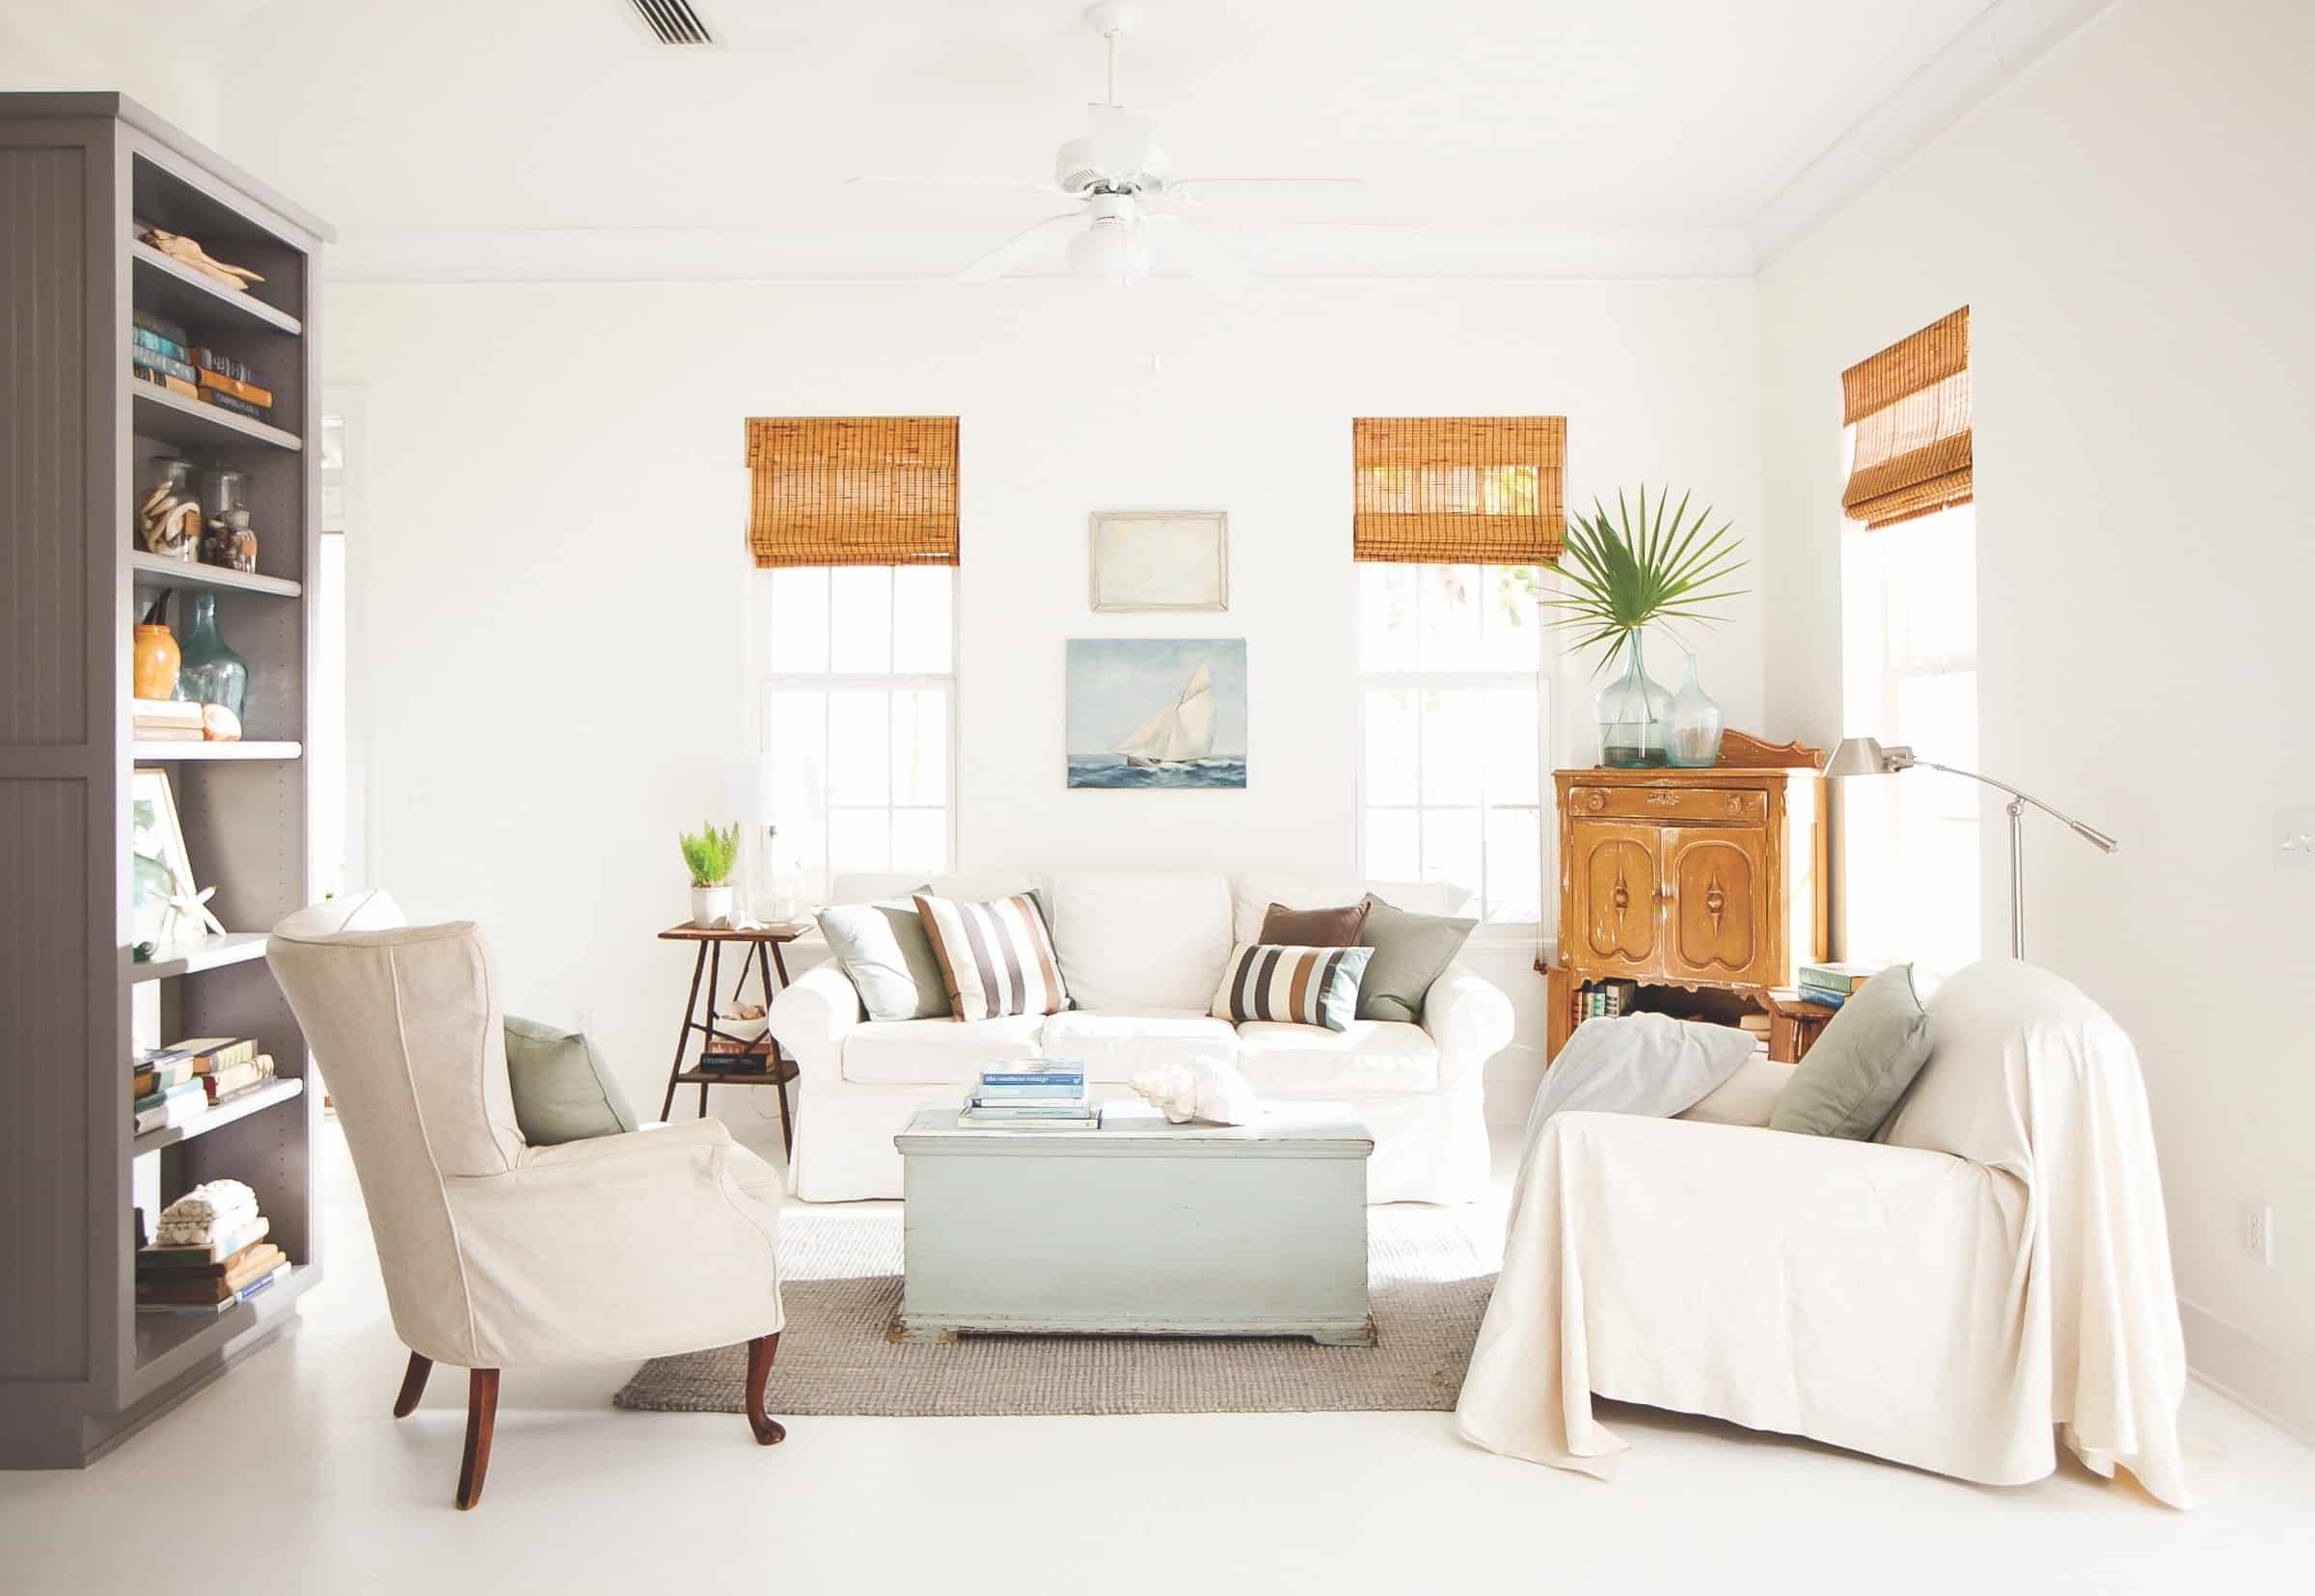 Interior designer Holly Shipman used beachy accents and a natural color palette for the inviting sitting room at this home in Seagrove Beach, Florida.